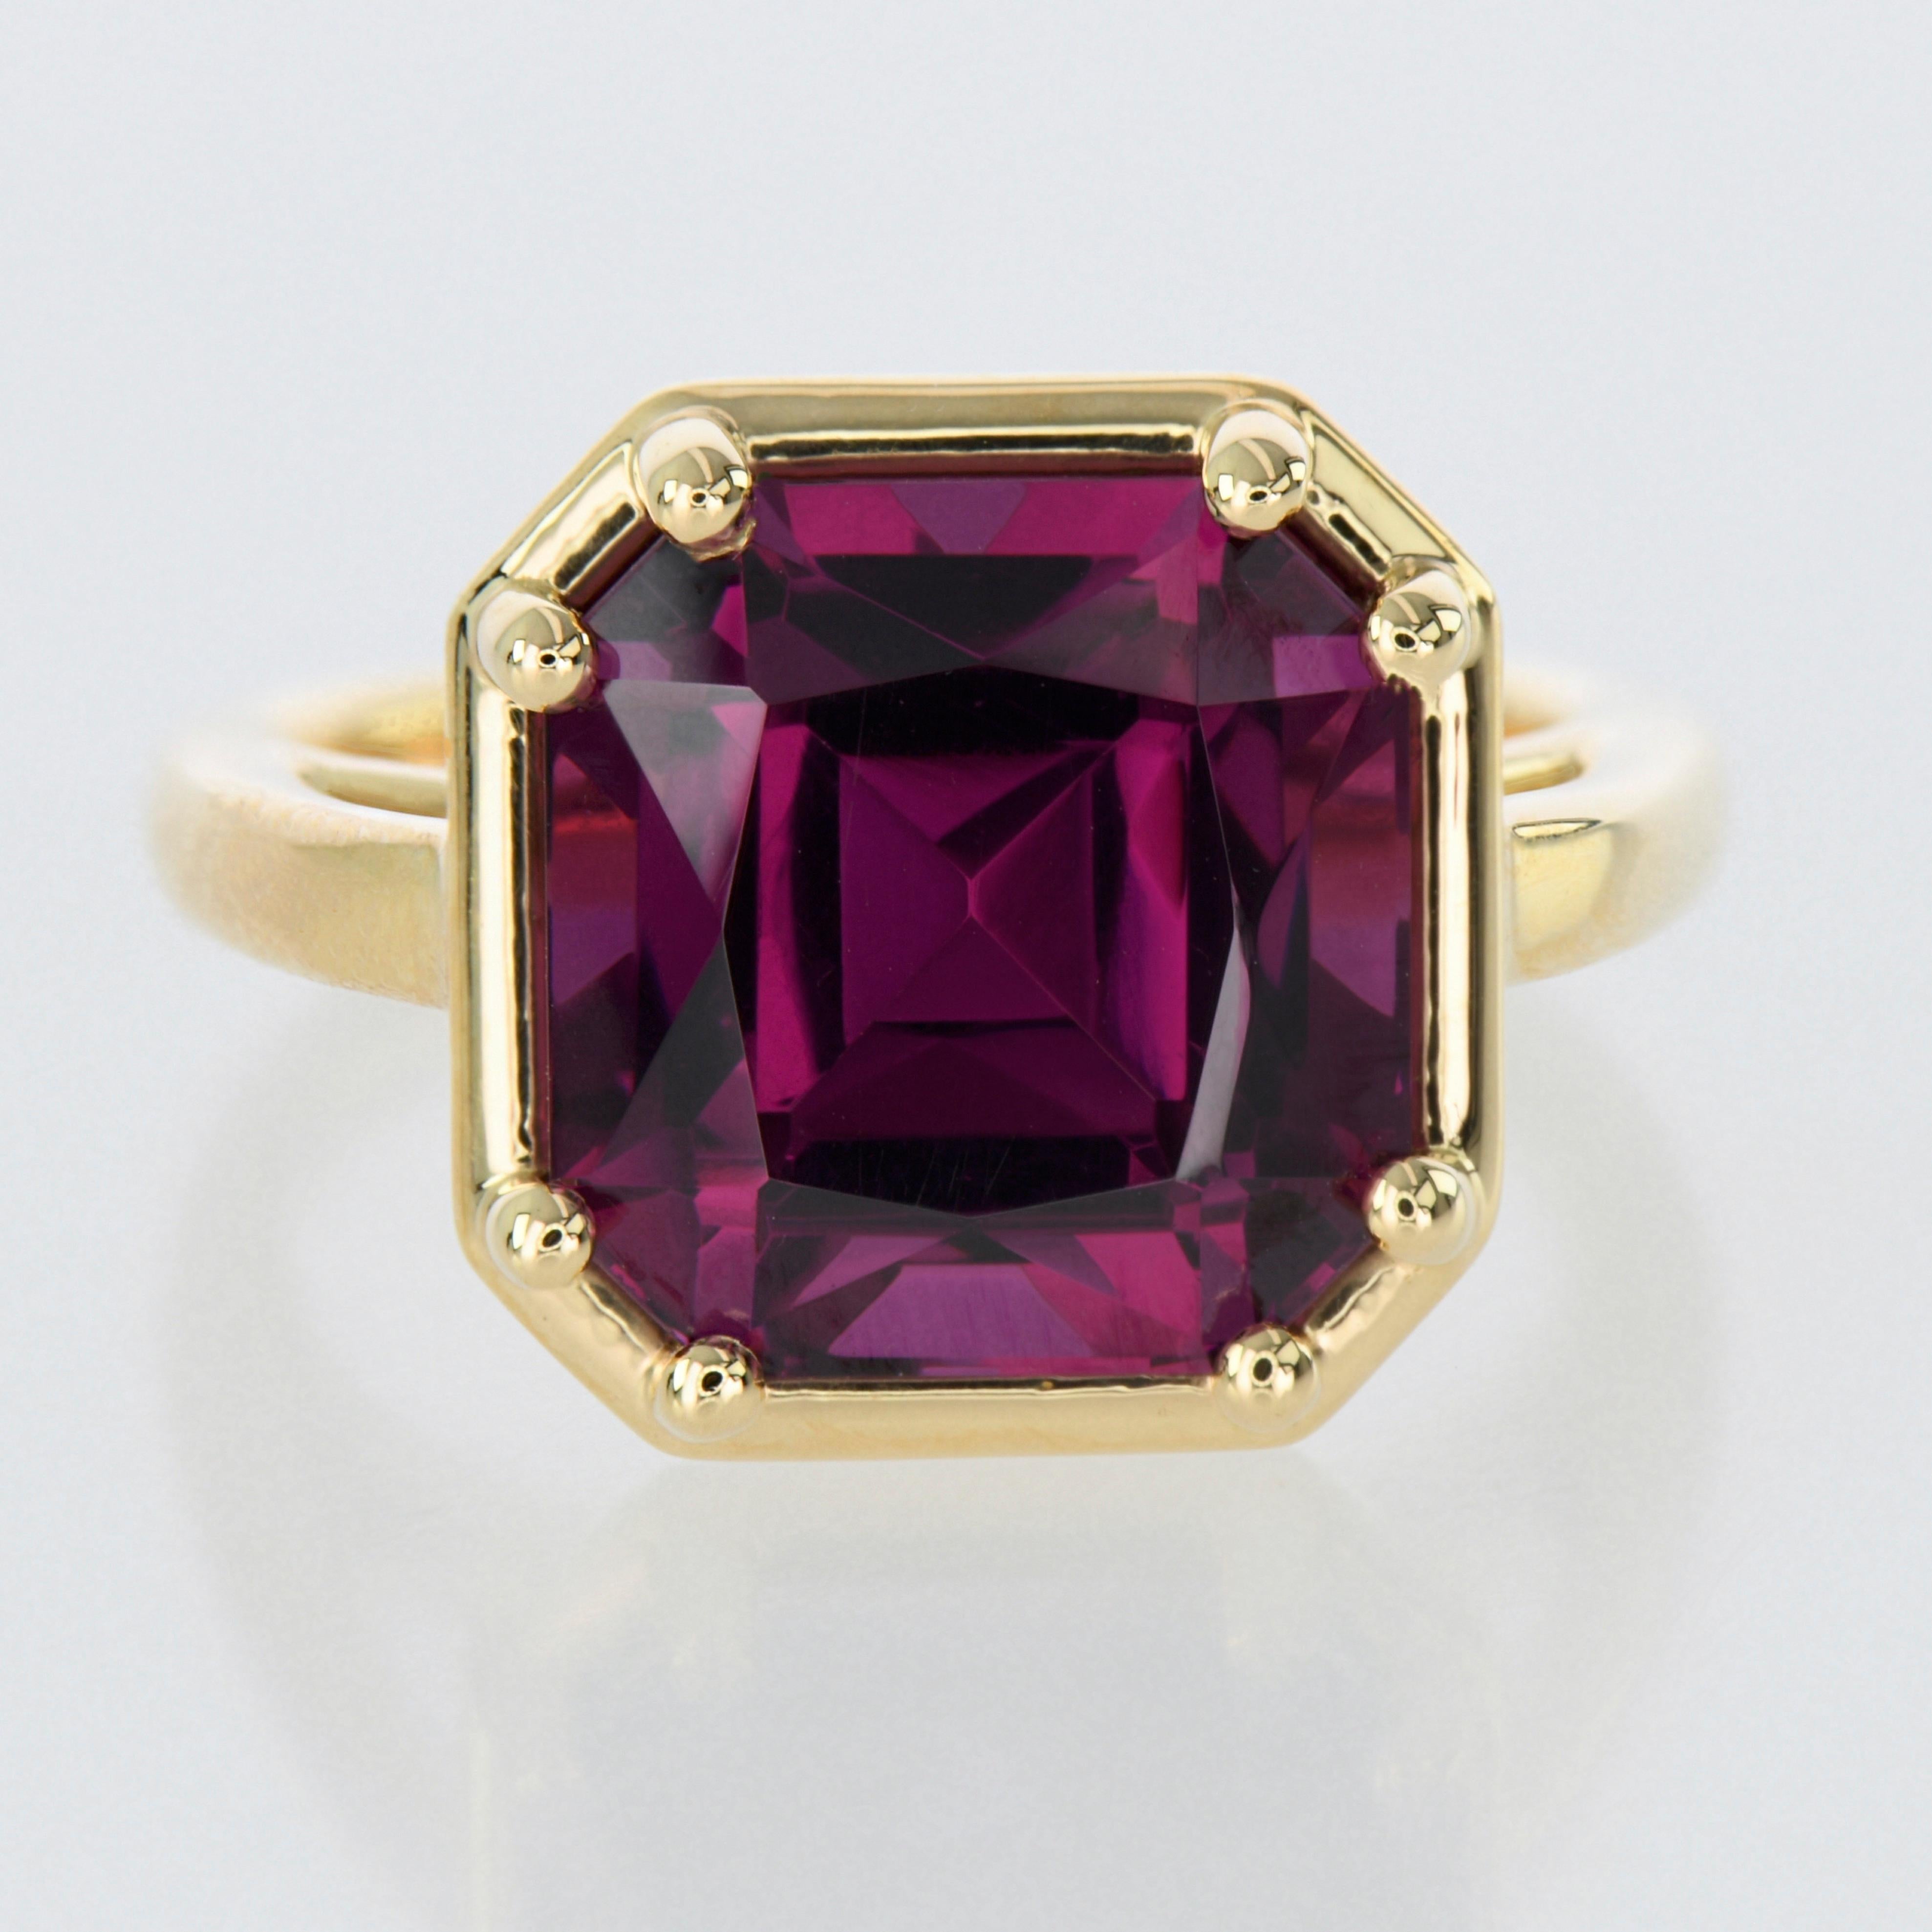 Rhodolite Ring

Creator: Carson Gray Jewels
Ring Size: 5
Metal: 18KT Yellow Gold
Stone: Rhodolite
Stone Cut: Radiant Mixed Step Cut
Weight: 7.54
Style: Statement Ring
Place of Origin: Tanzania
Period: Modern
Date of Manufacture (circa): November